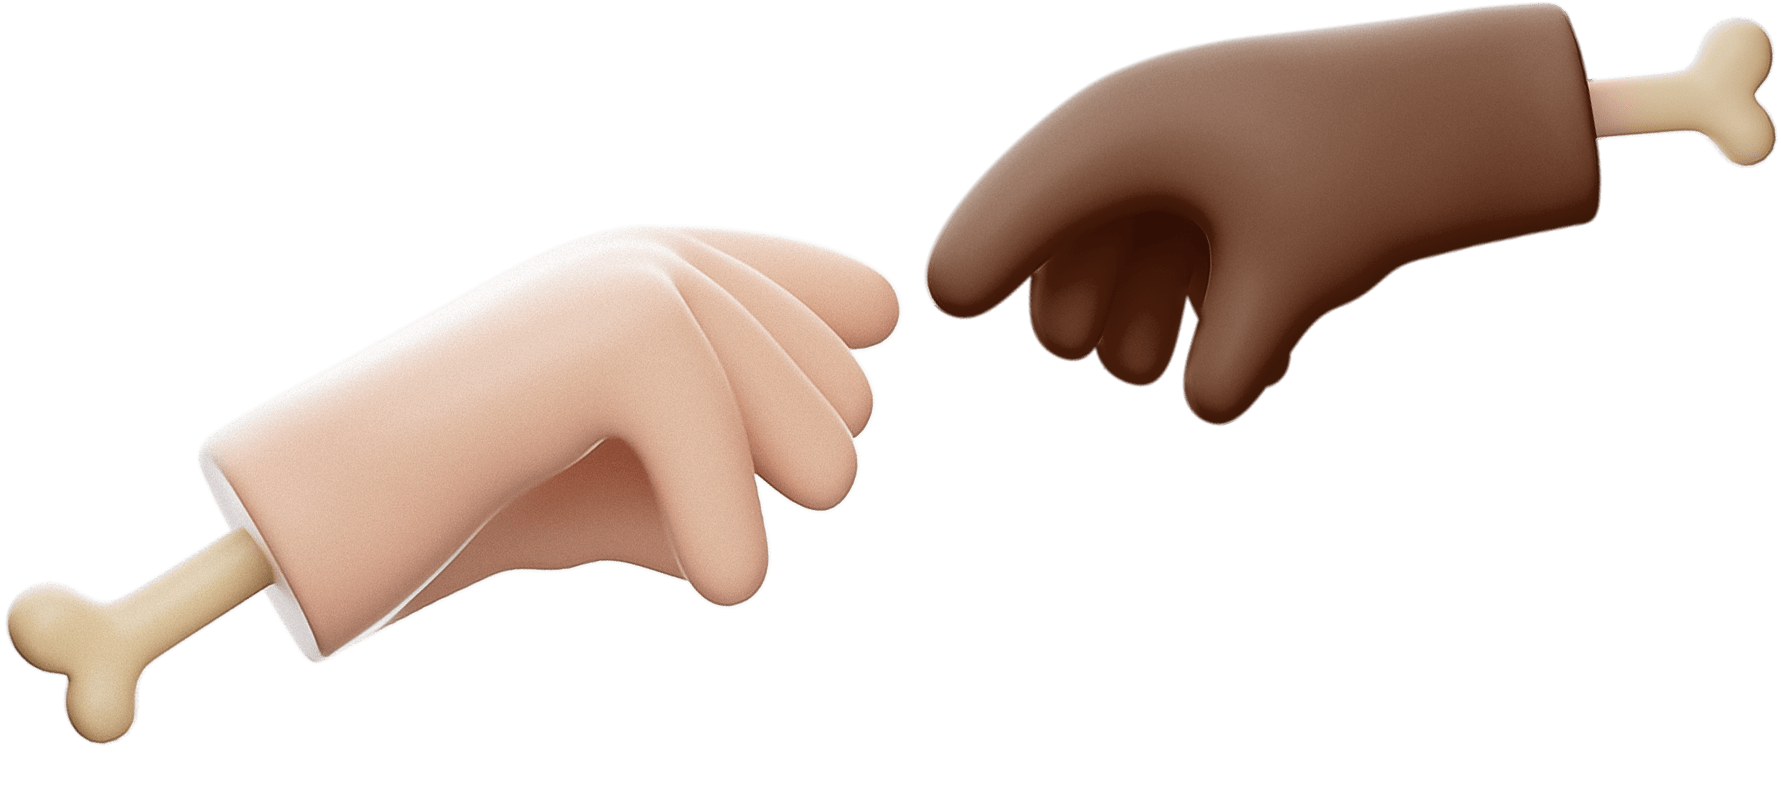 Two 3D hands reaching towards each other